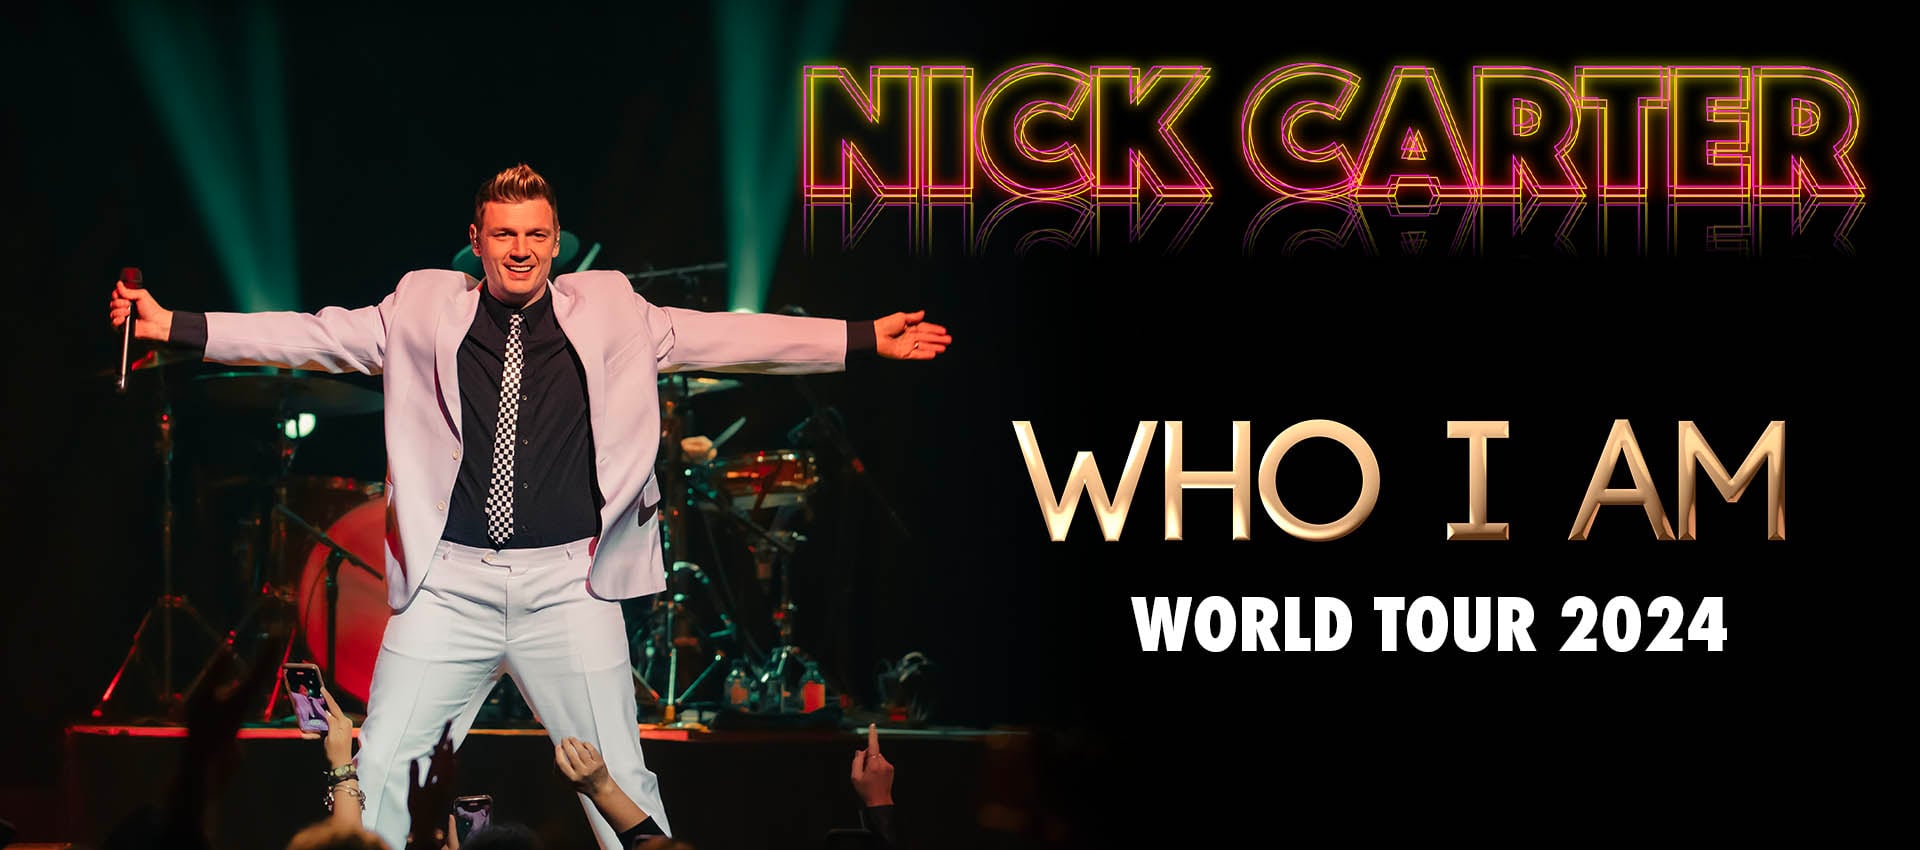 Backstreet Boys’ Nick Carter to hit the stage in Vietnam during world tour